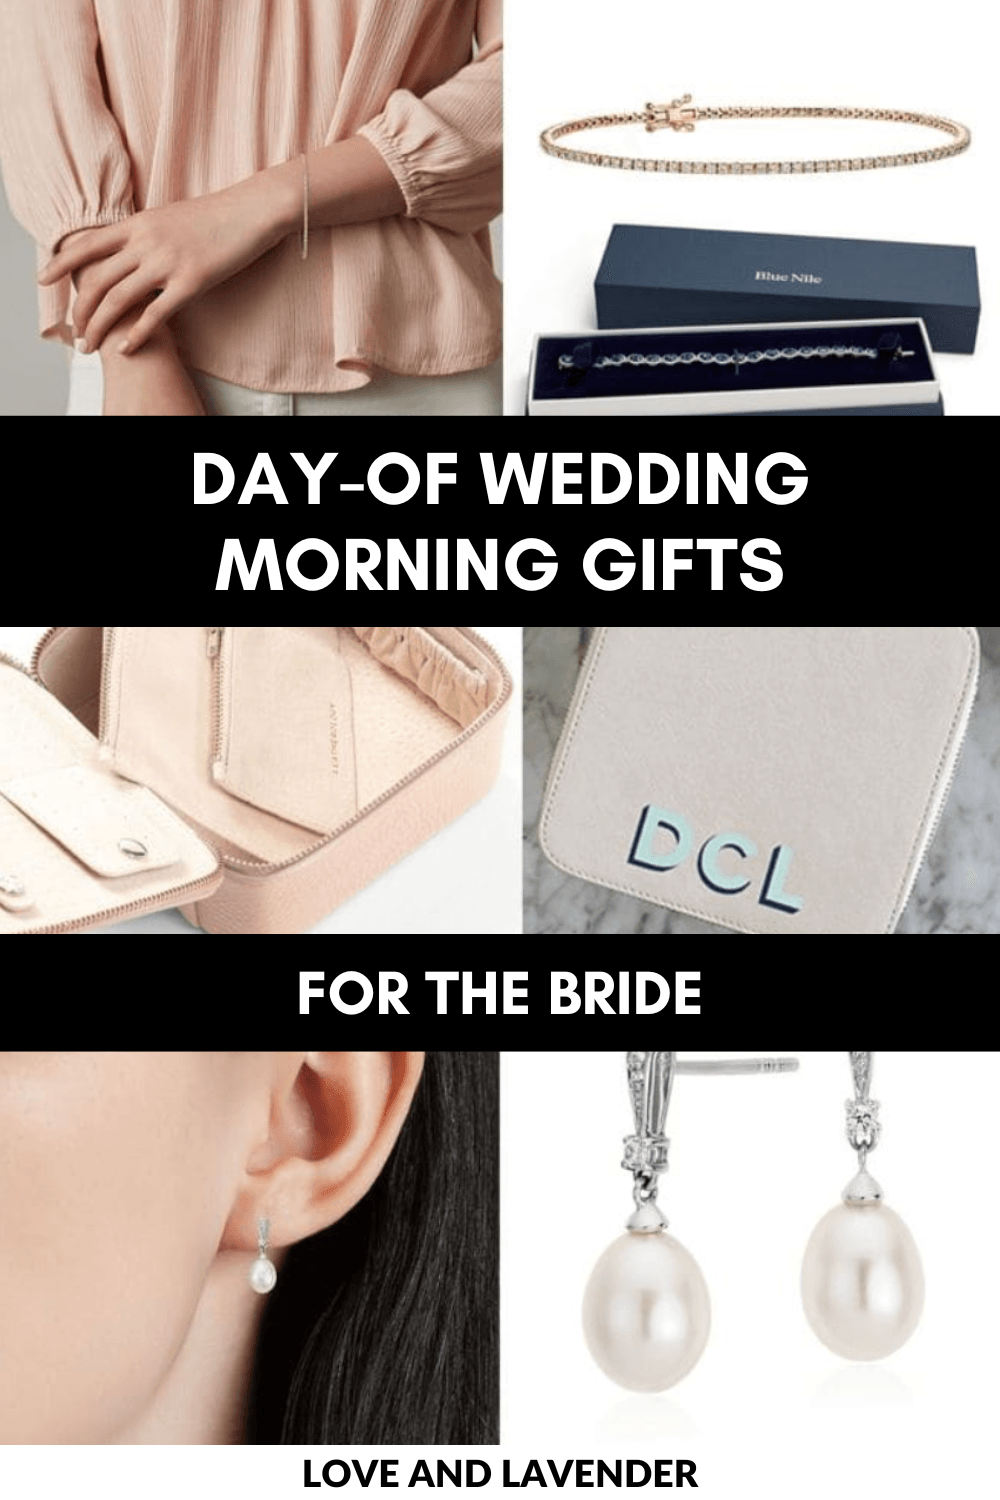 56 Day-of Wedding Morning Gifts for the Bride